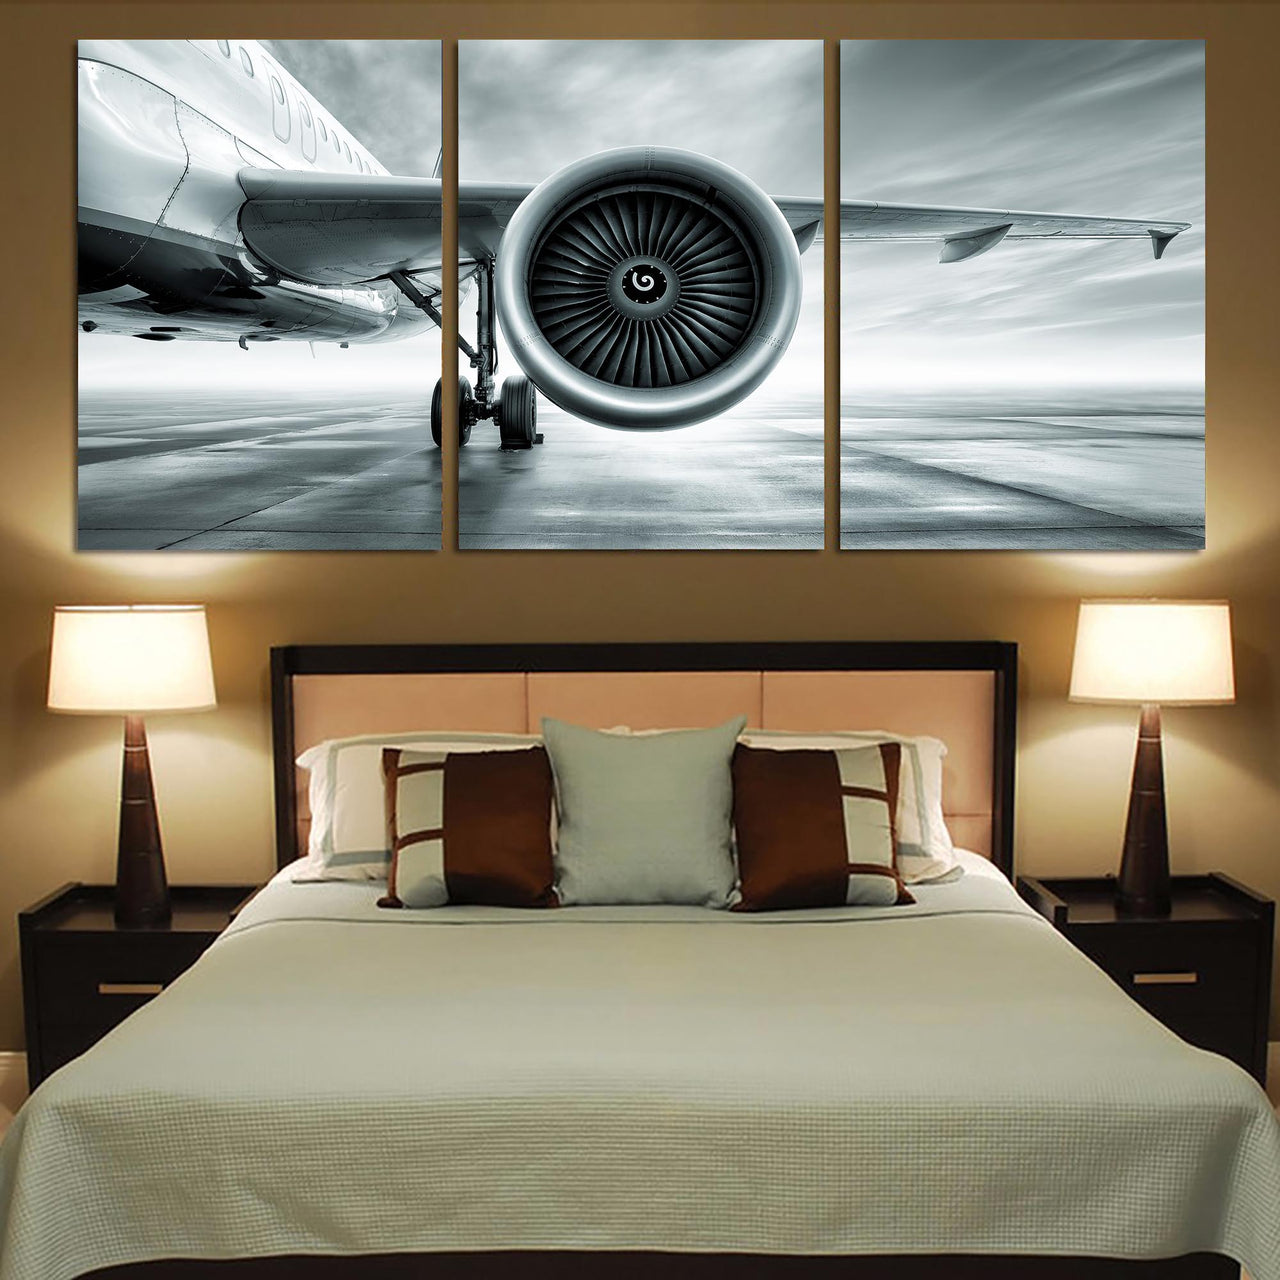 Super Cool Airliner Jet Engine Printed Canvas Posters (3 Pieces)